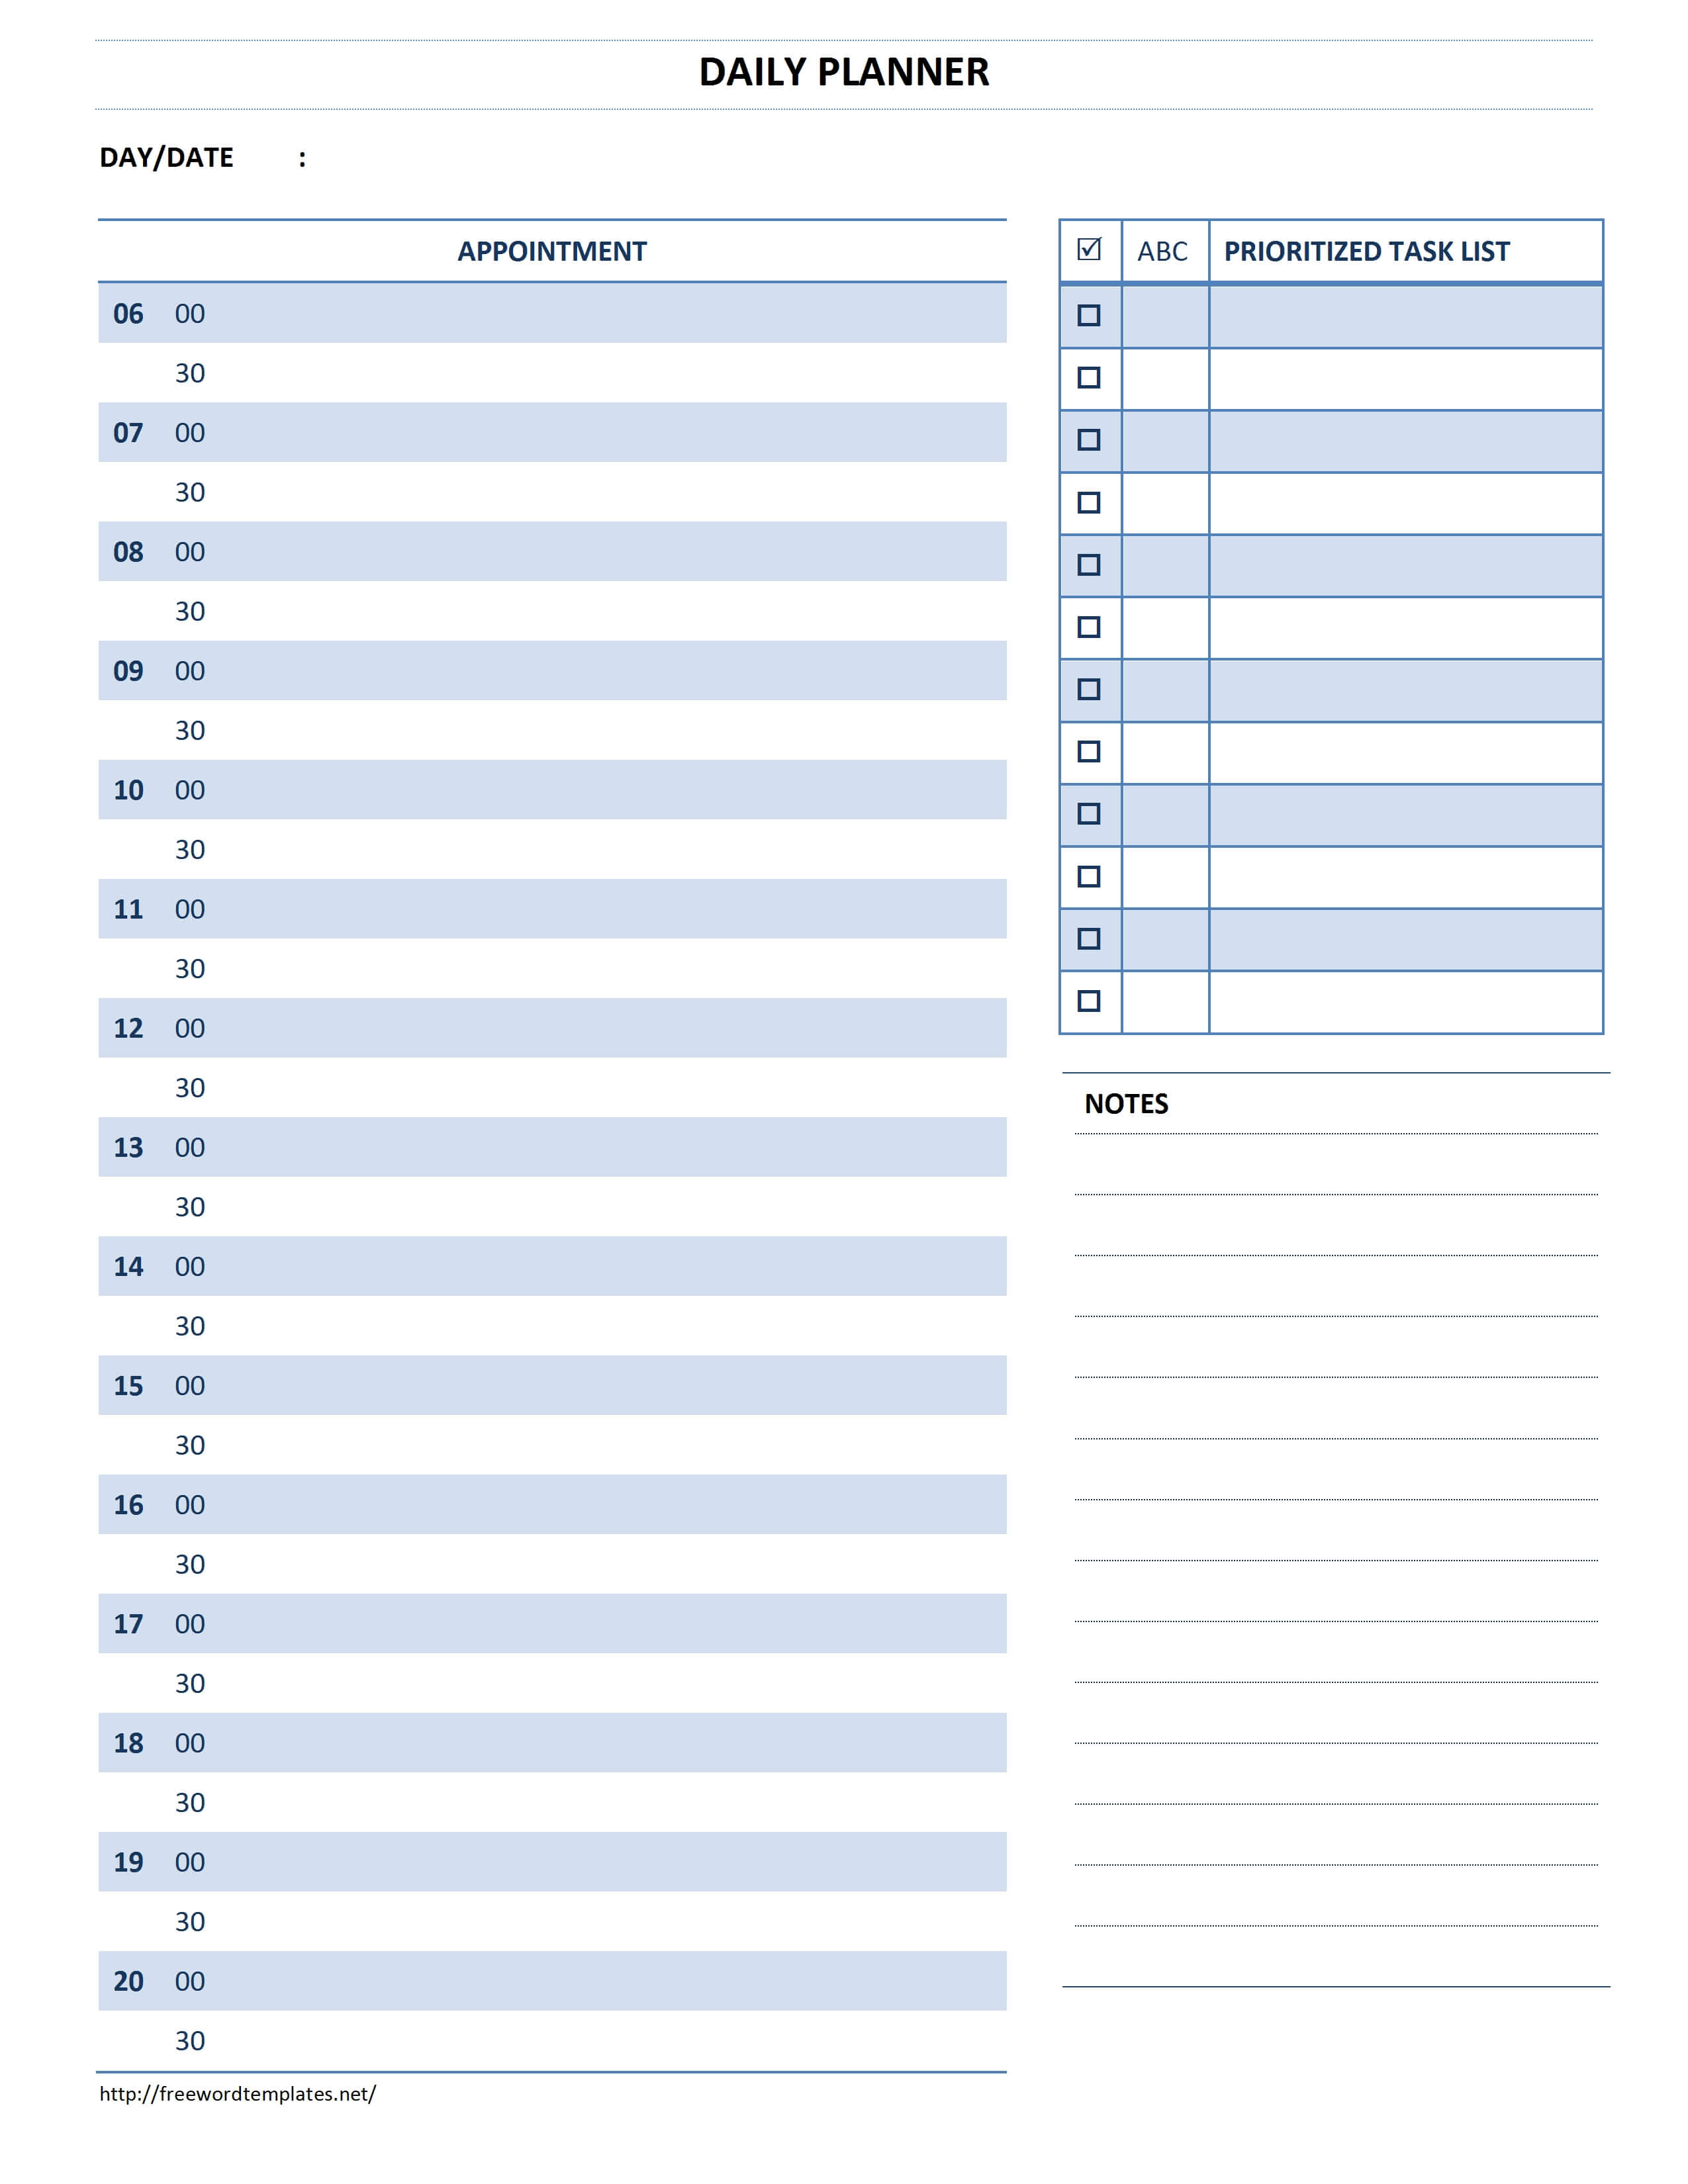 Daily Planner Template Pertaining To Appointment Sheet Template Word